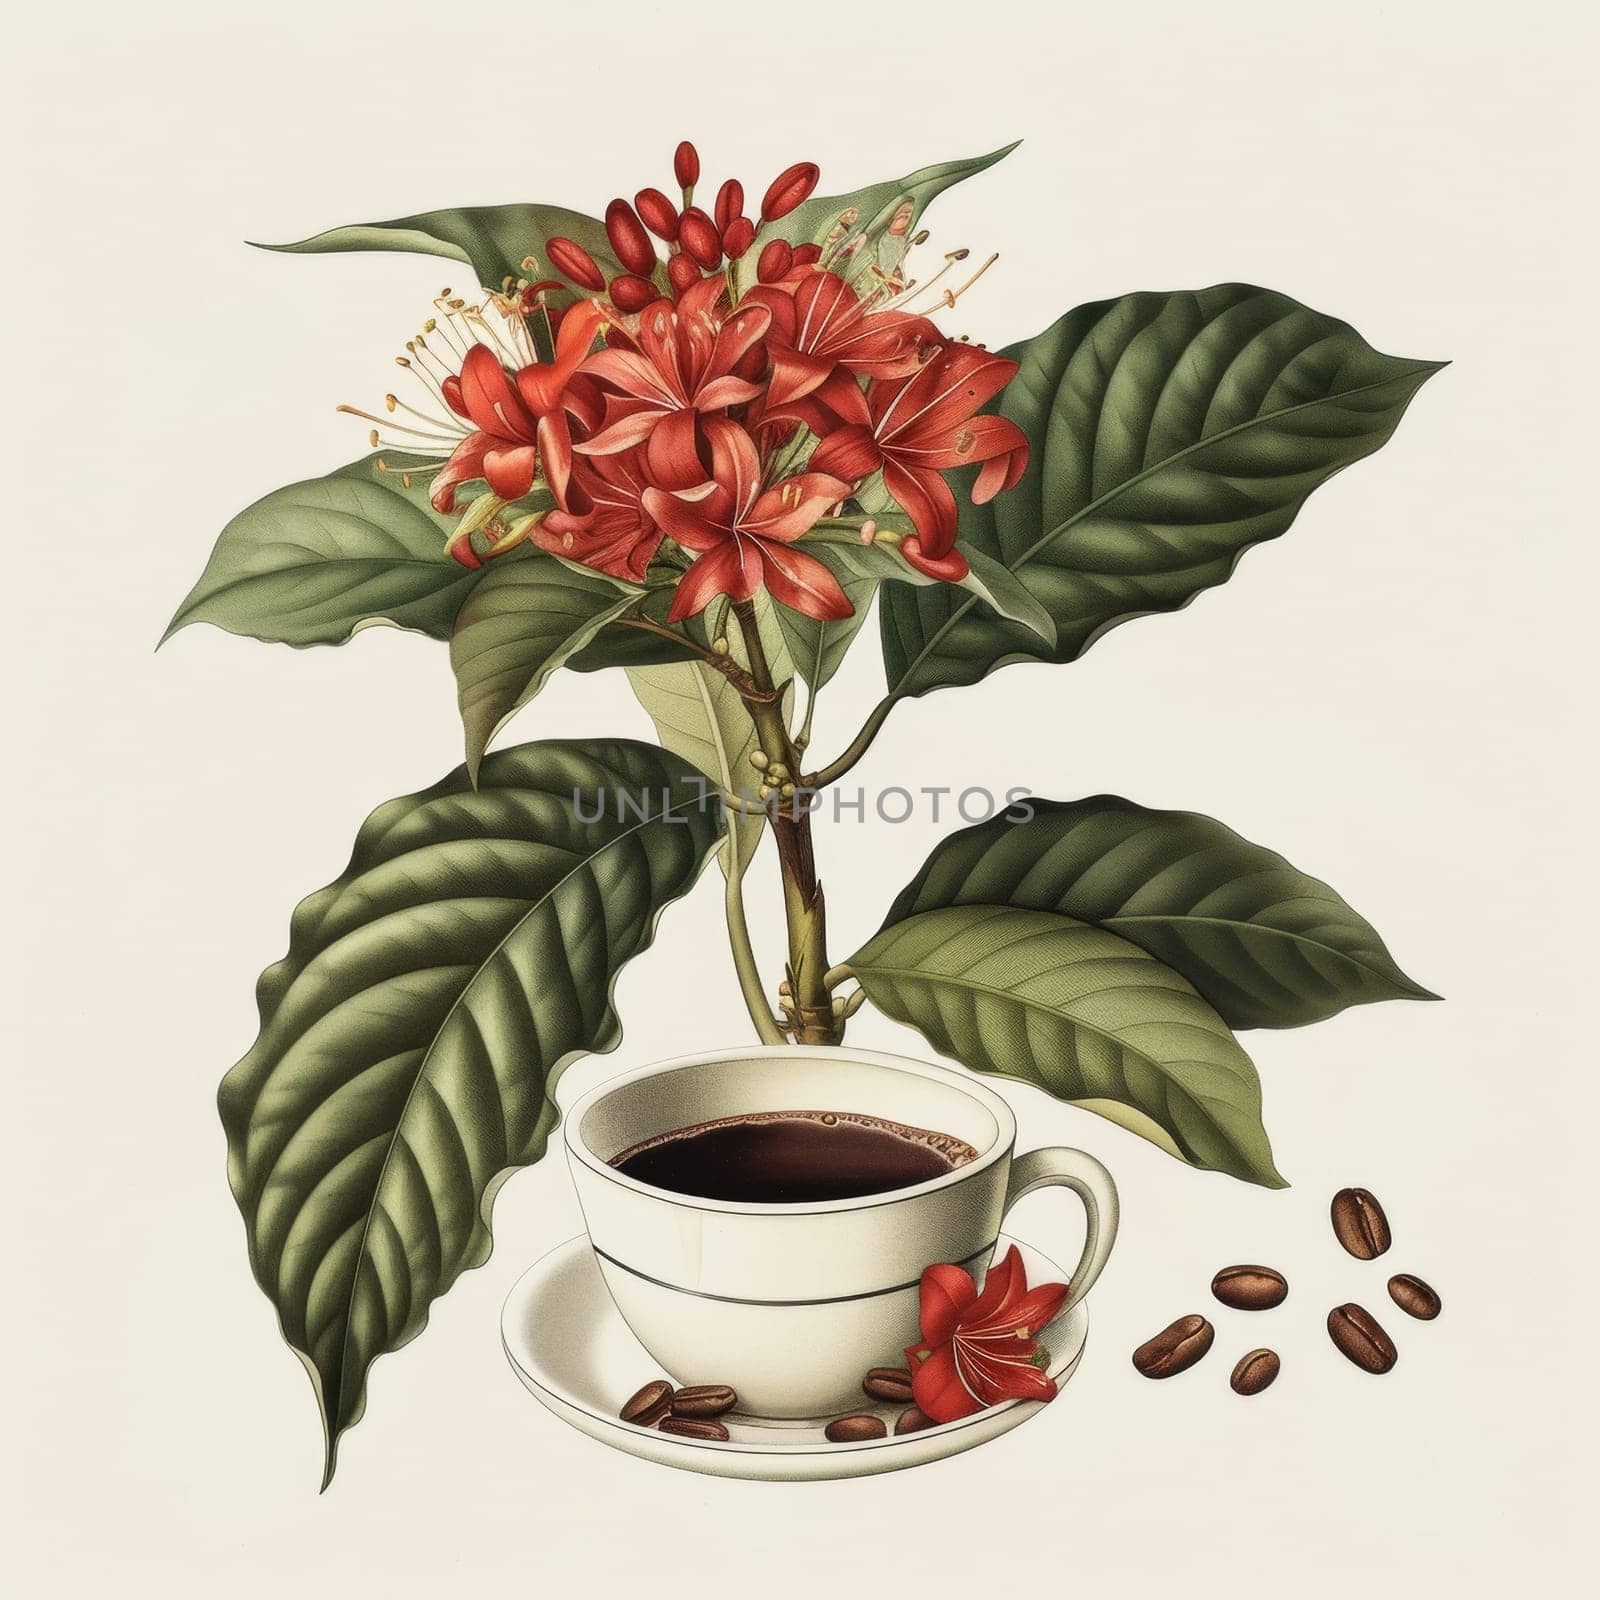 A drawing of a cup with coffee and flowers on it